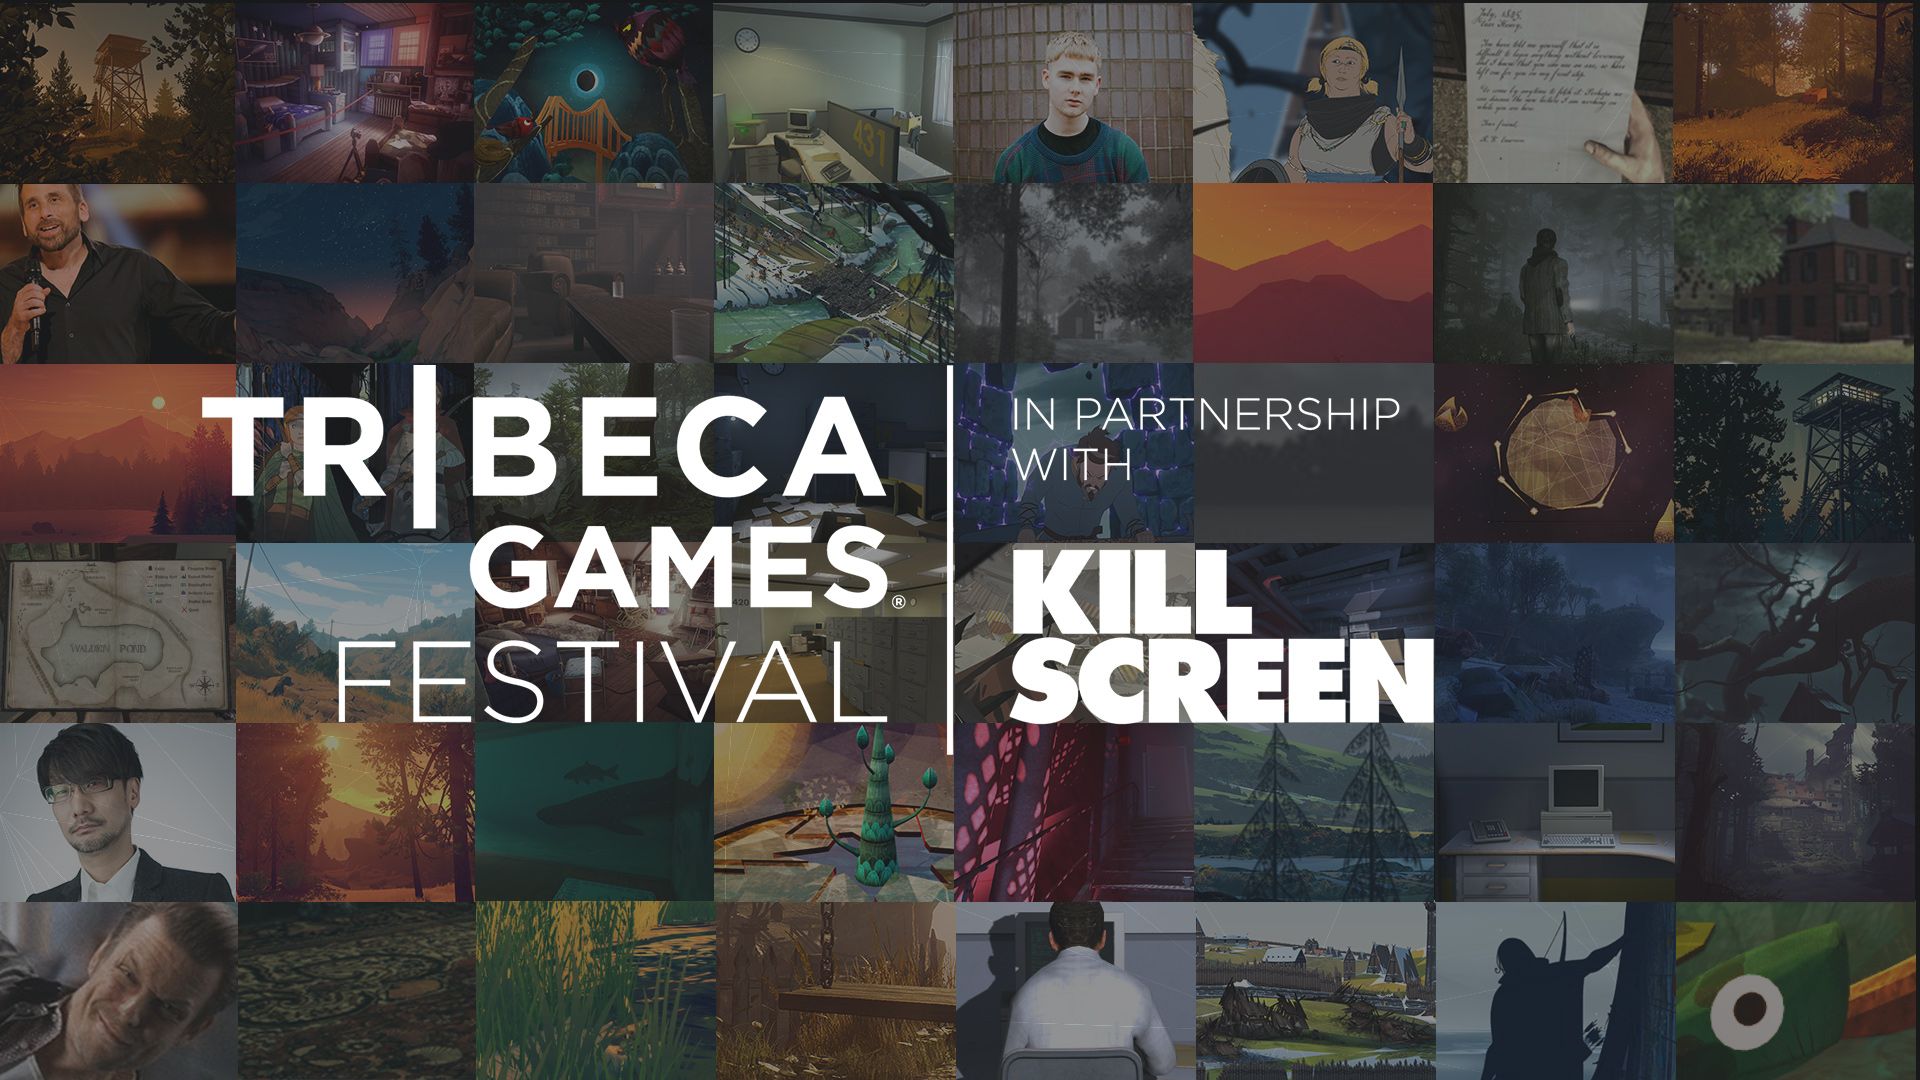 Tribeca Games Festival and Merging the Worlds of Gaming and Cinema